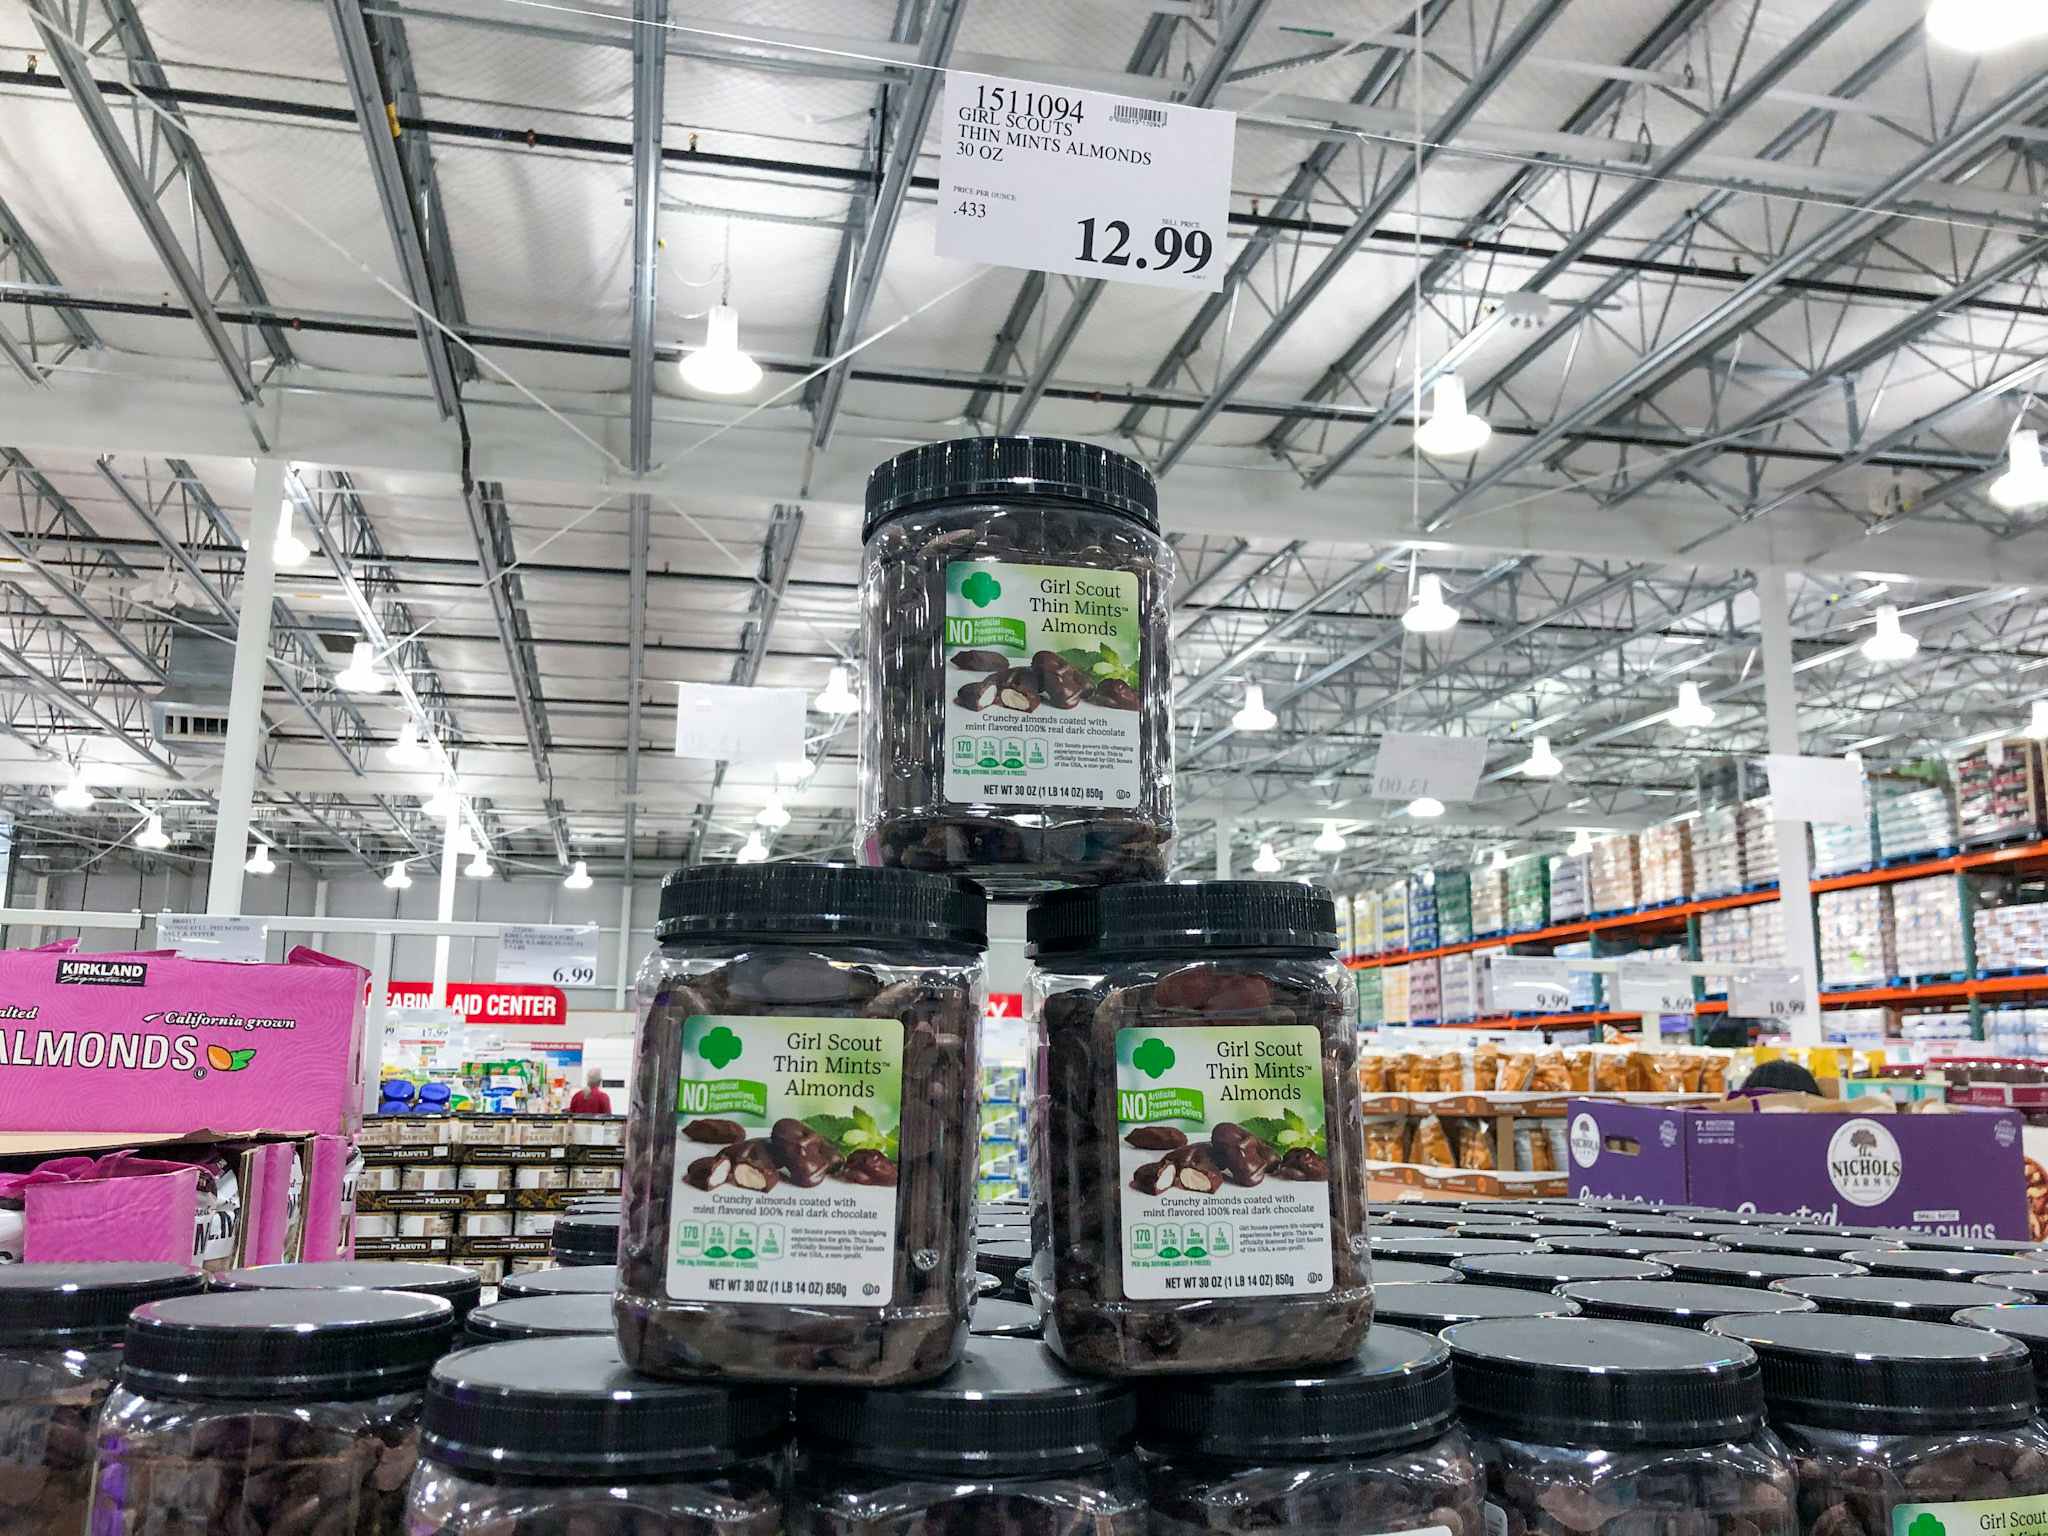 costco-girl-scout-thin-mint-almonds-051021